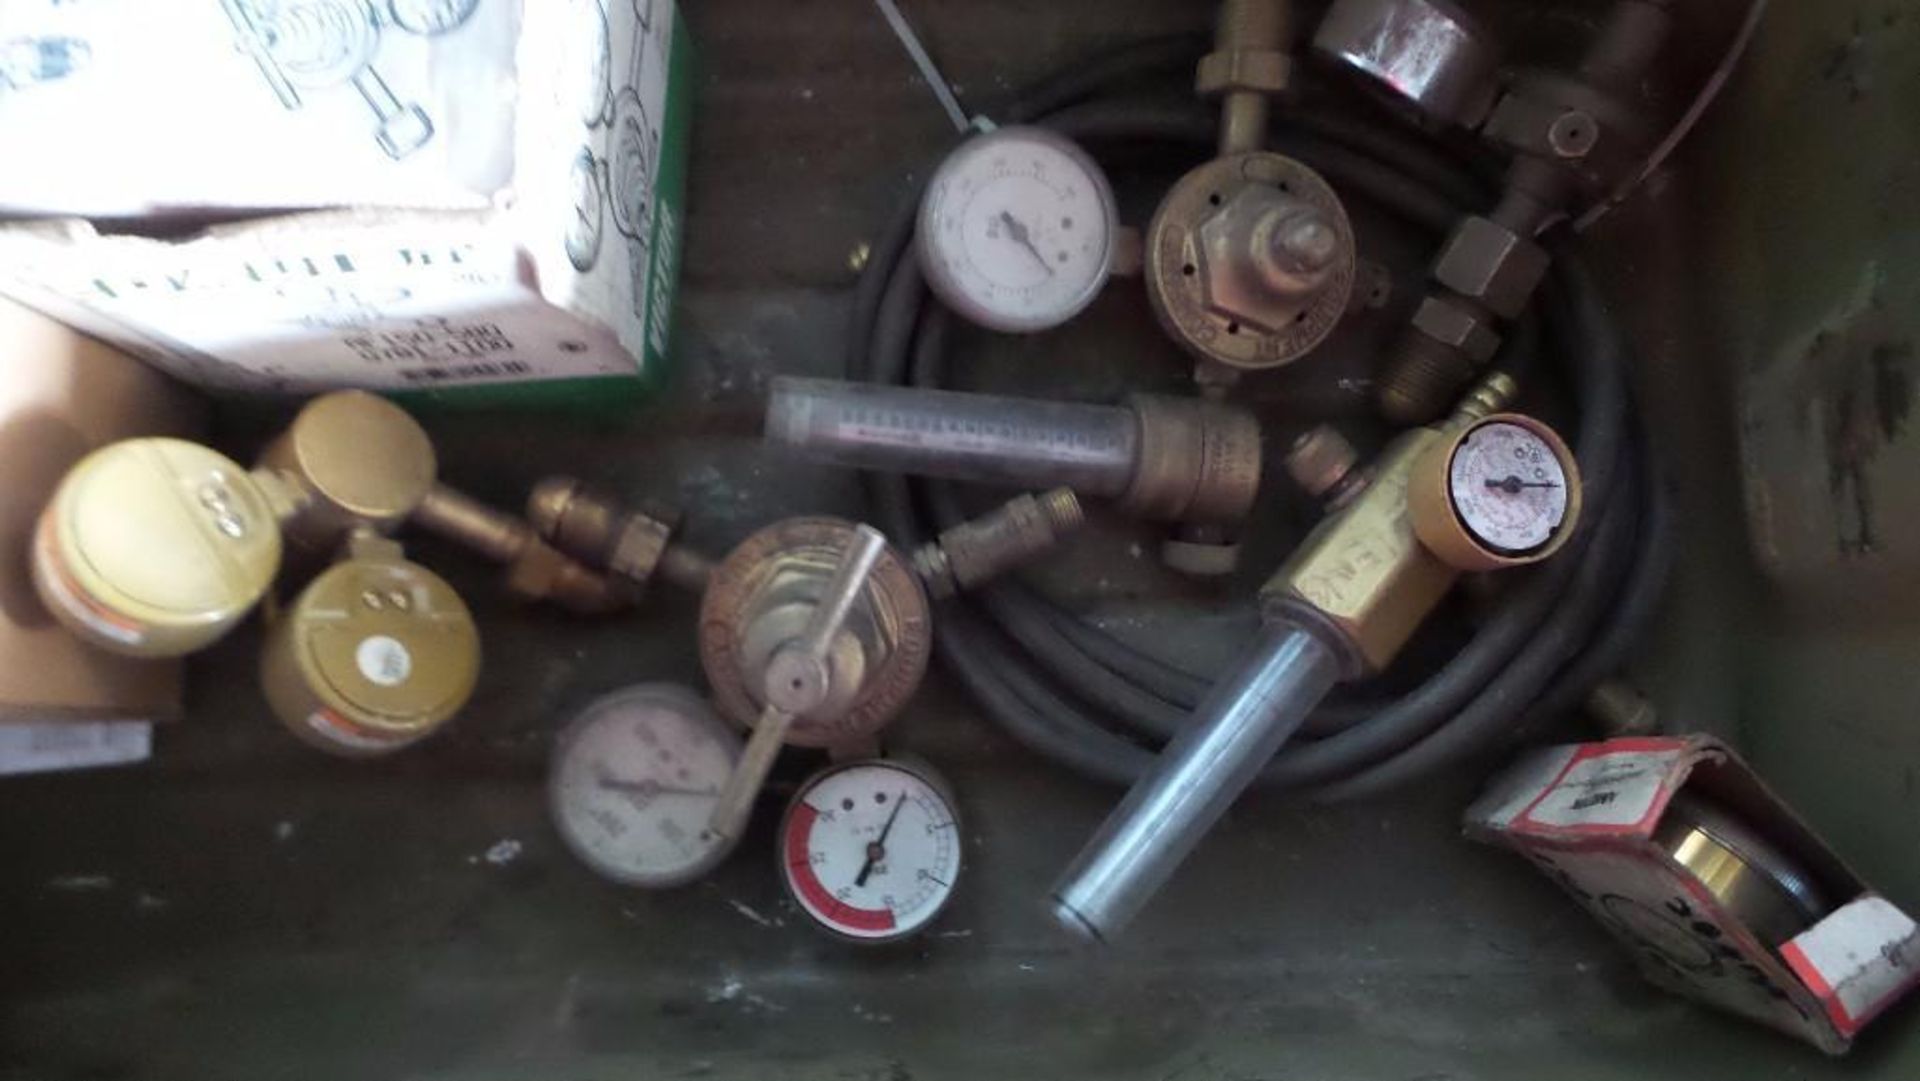 3 New Argon gauges and Various other gauges  in a  cool military box - Image 9 of 11